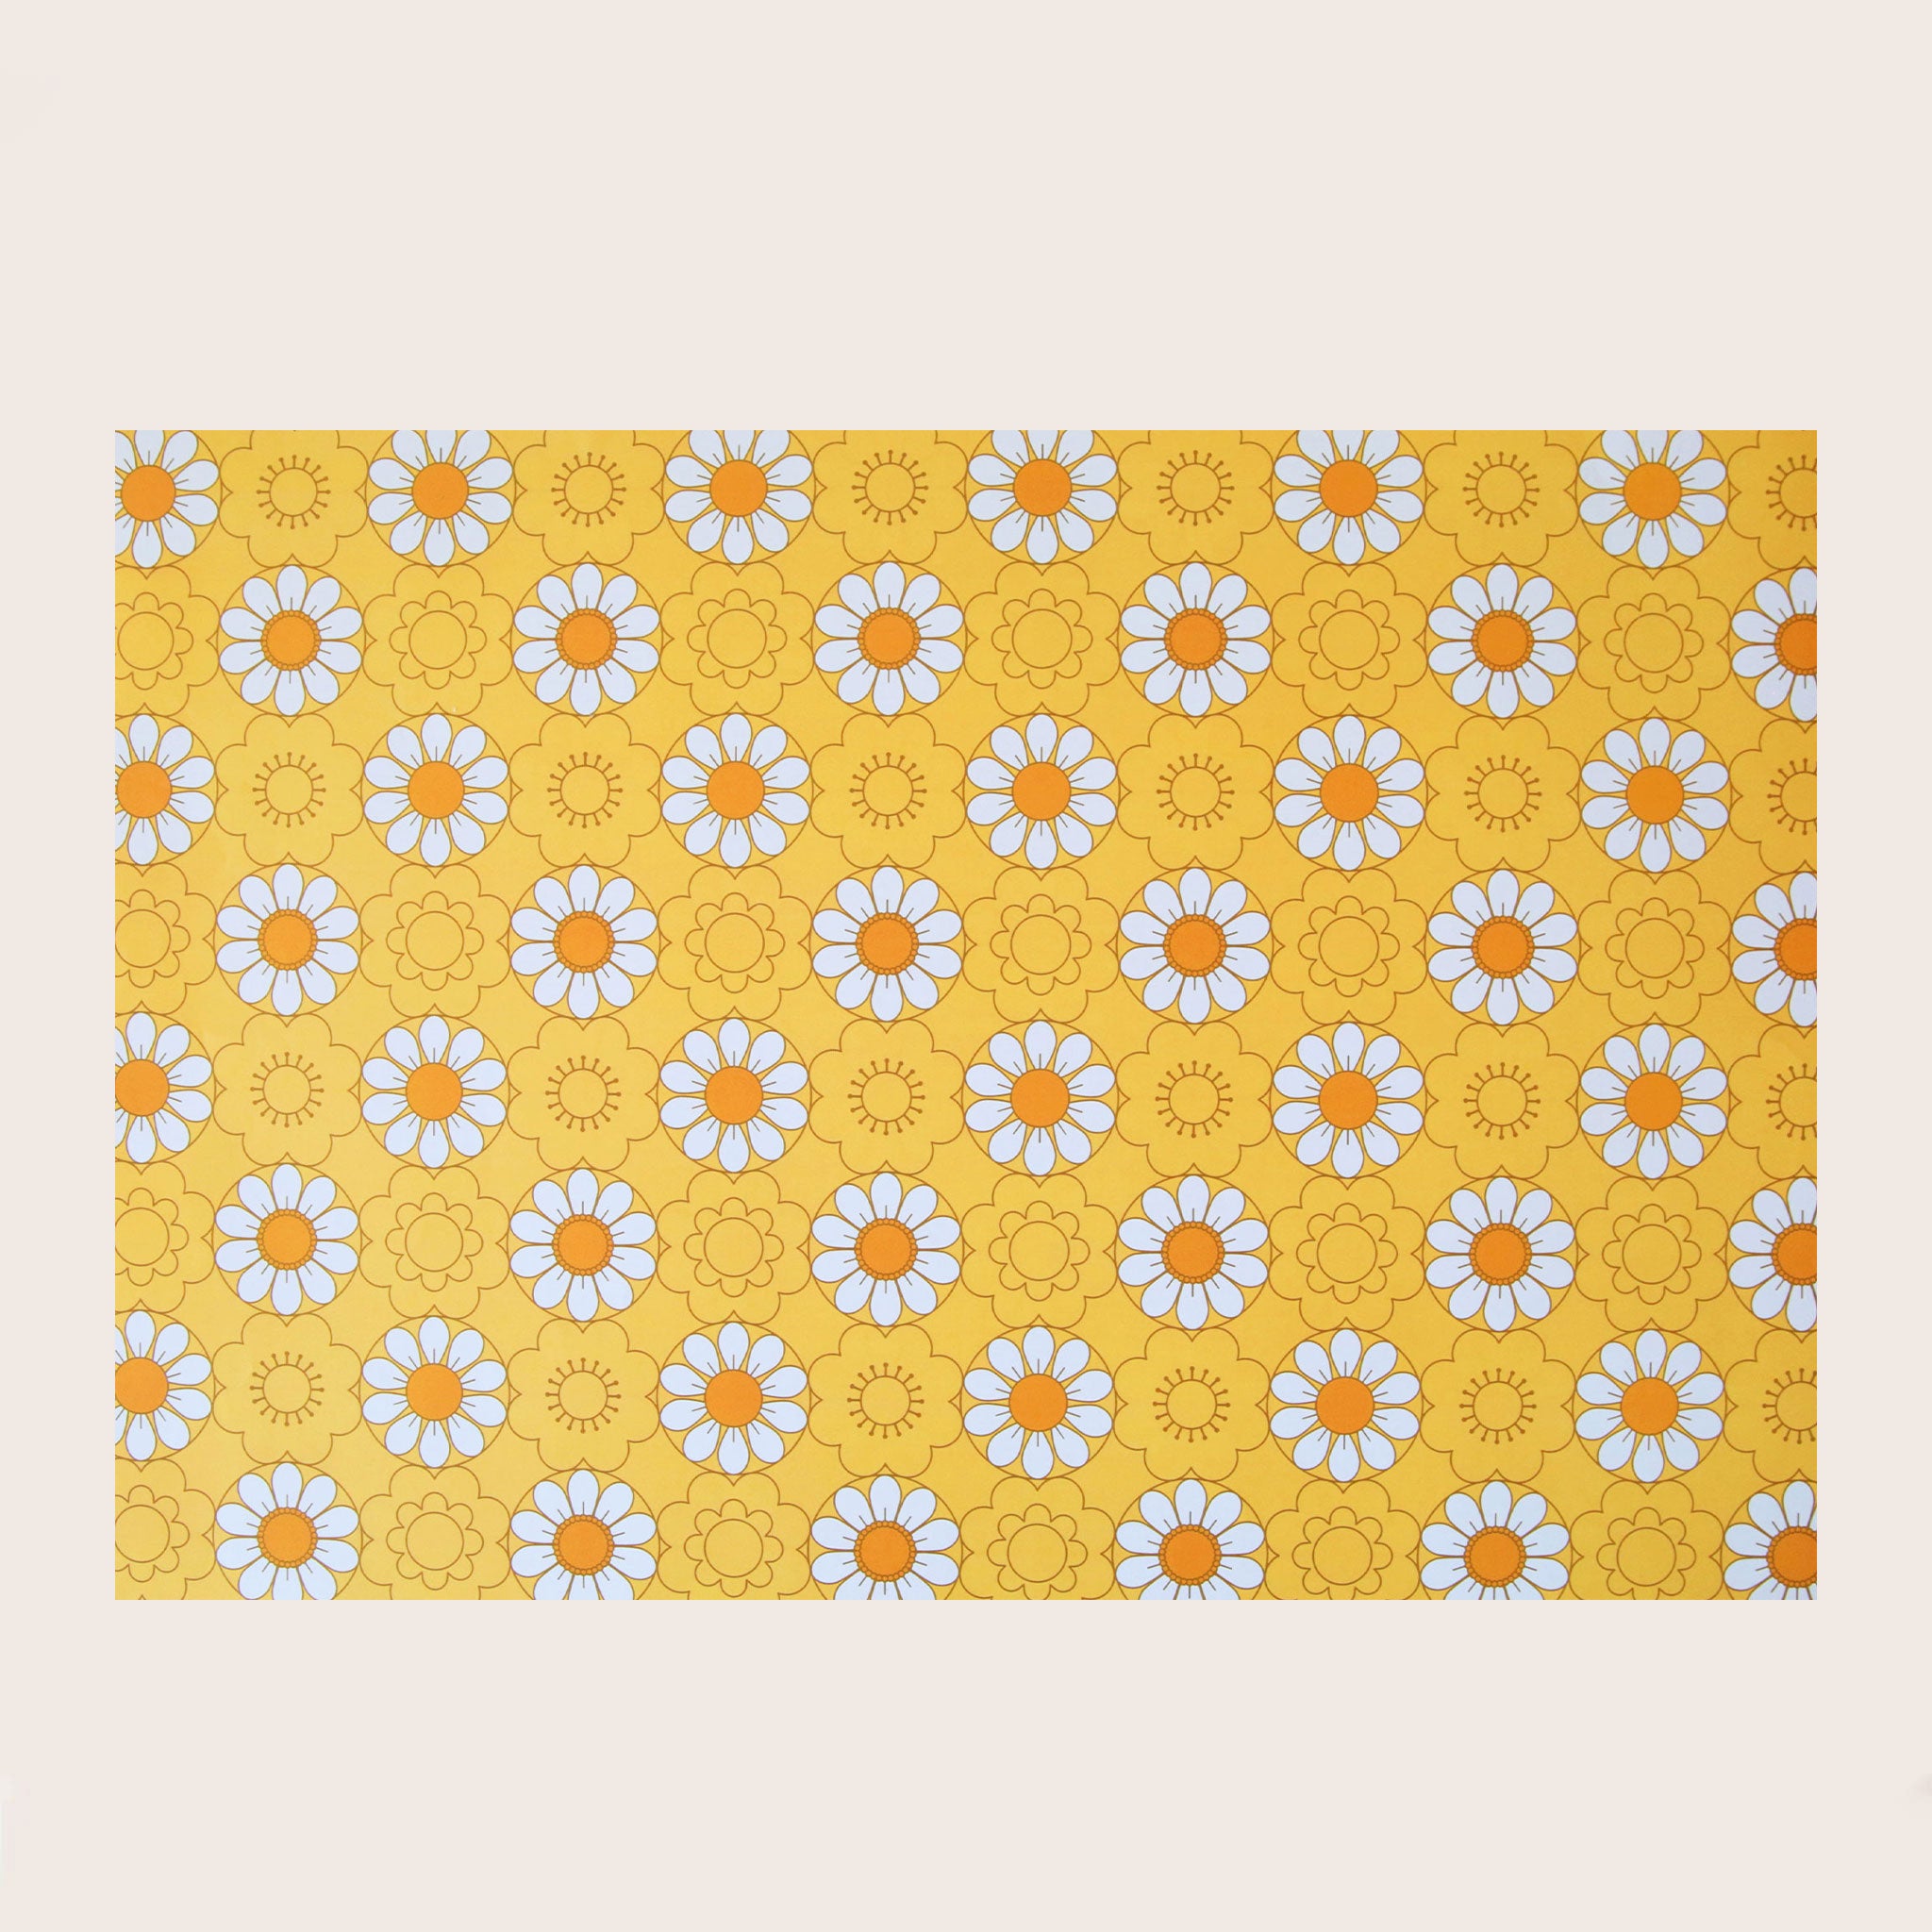 A single sheet of gift wrap with reversible sides. One side features a daisy print on a mustard yellow background while the other side features the same print on an orange background.